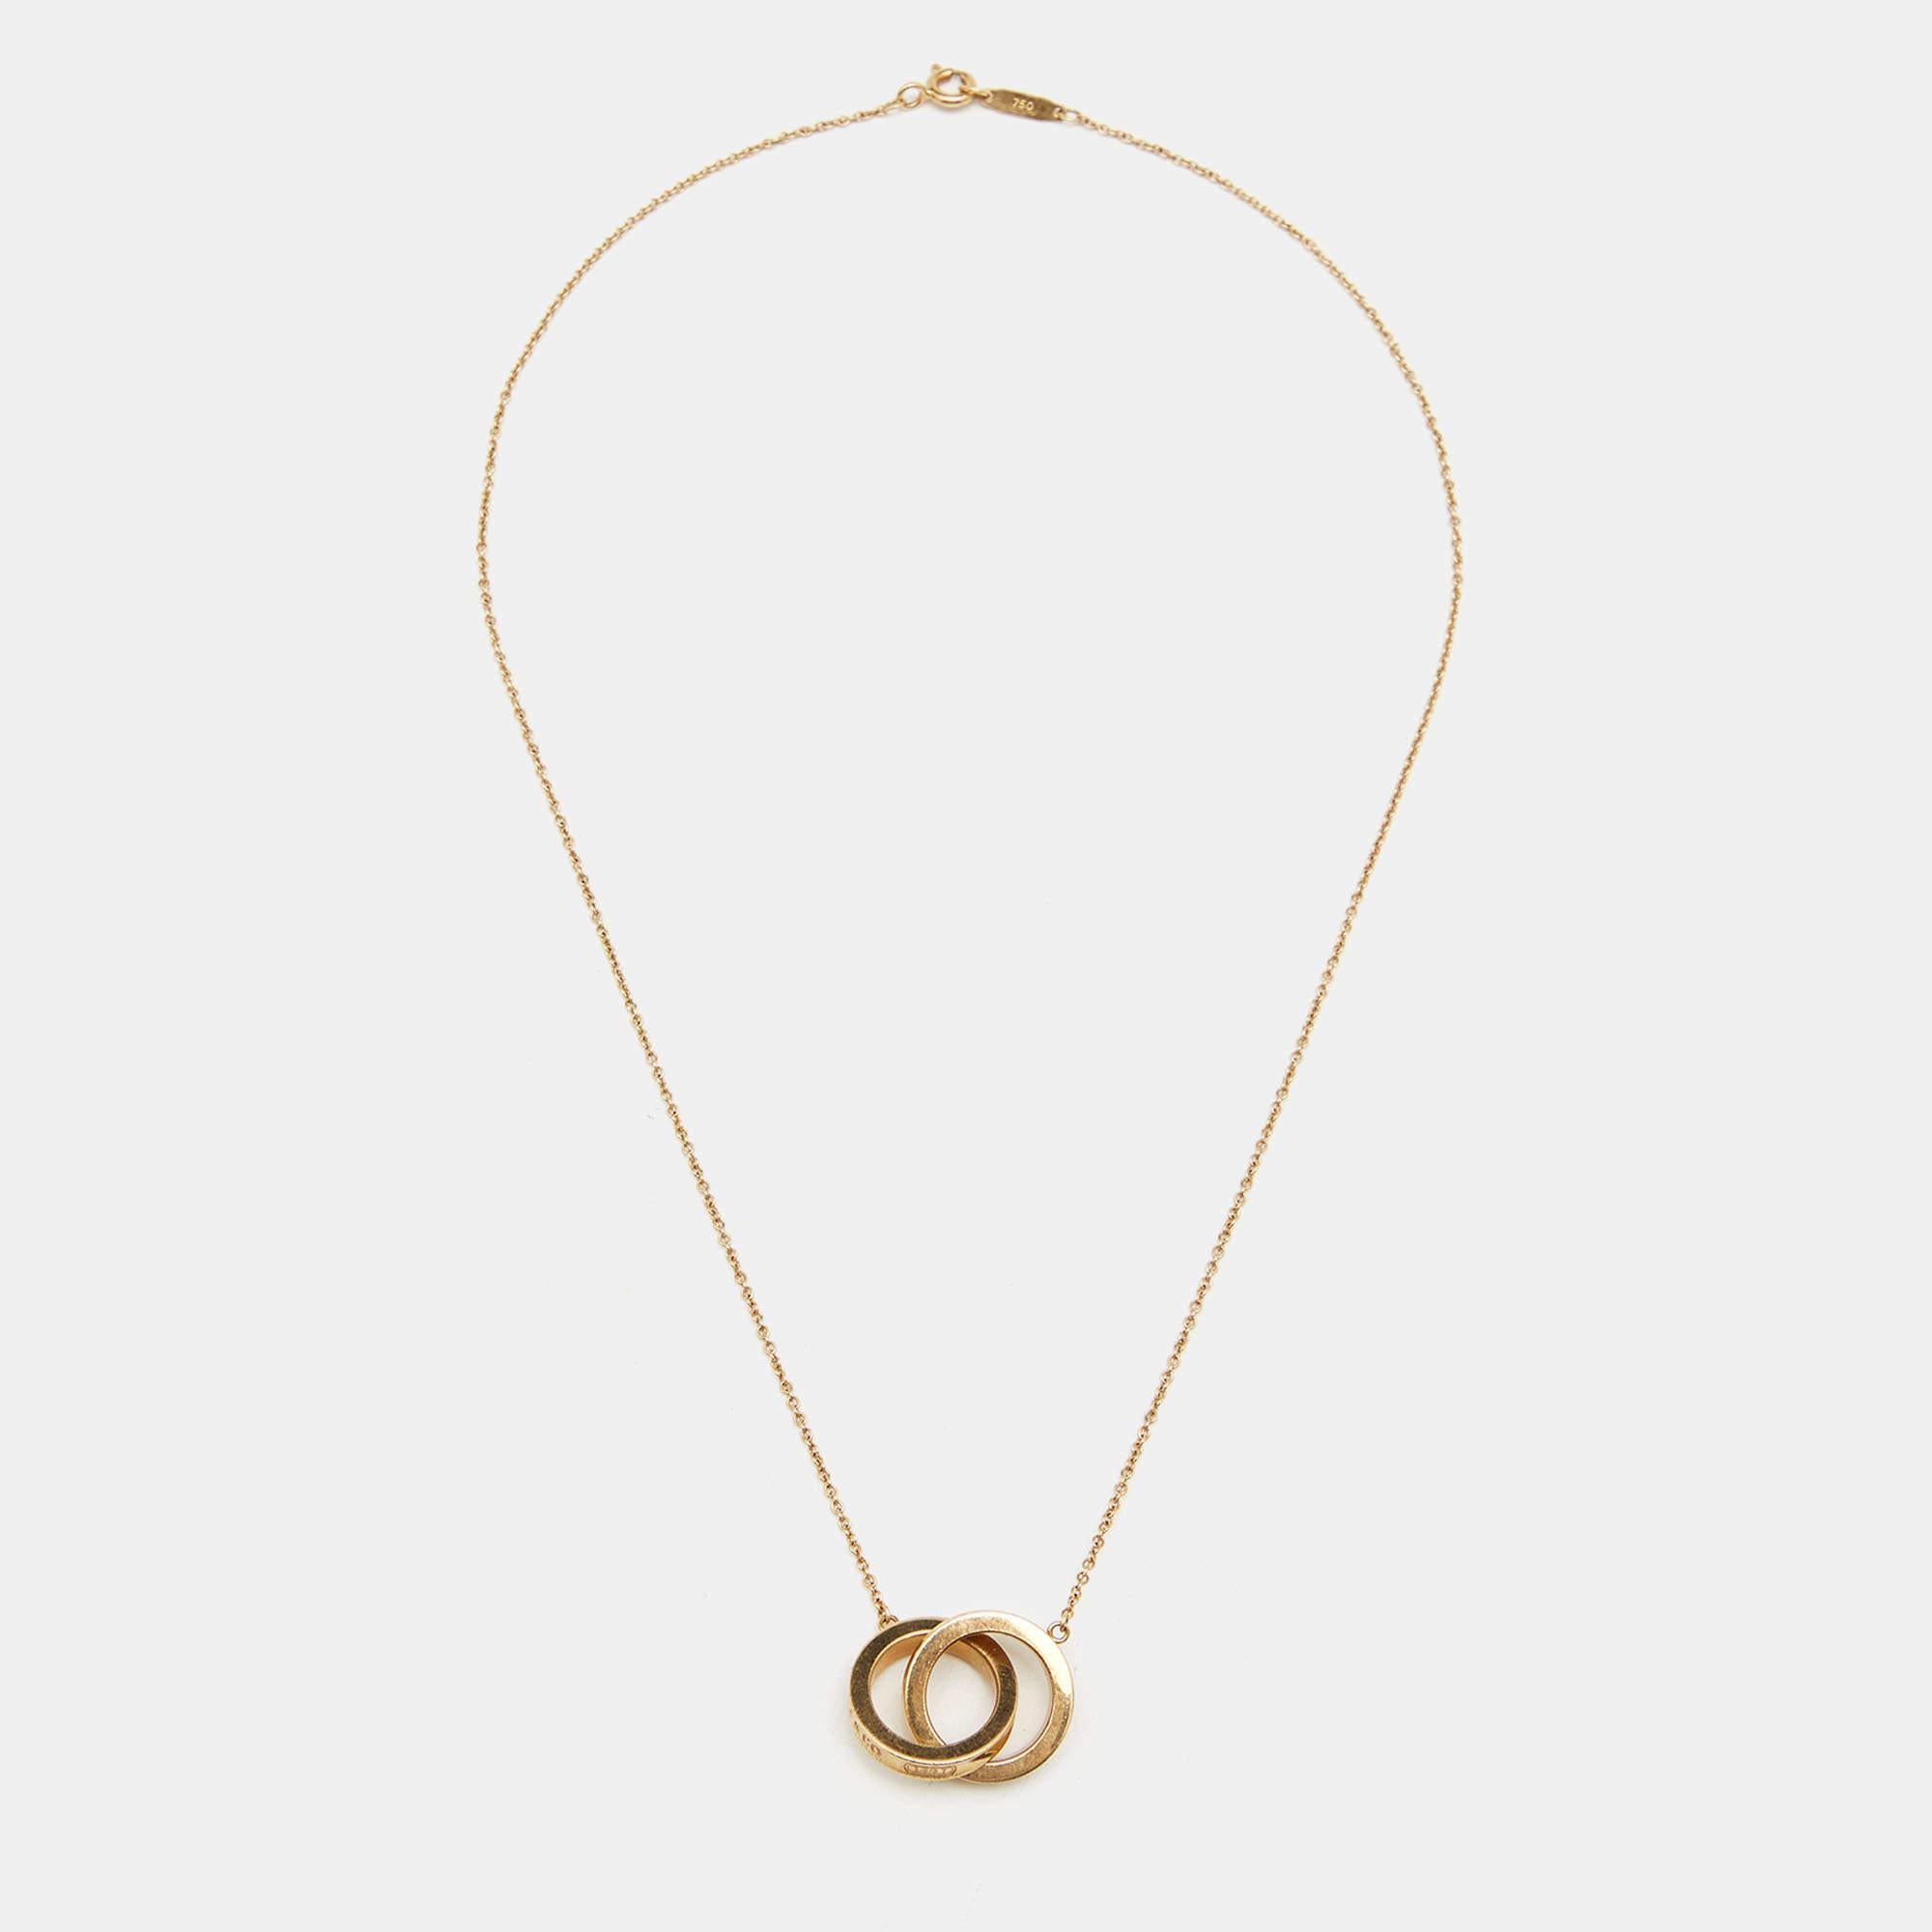 The Tiffany & Co. 1837 necklace is a symbol of timeless elegance. Crafted with exquisite attention to detail, the interlocking circles design represents eternal unity and connection. Made from luxurious 18k yellow gold, this necklace is a stunning